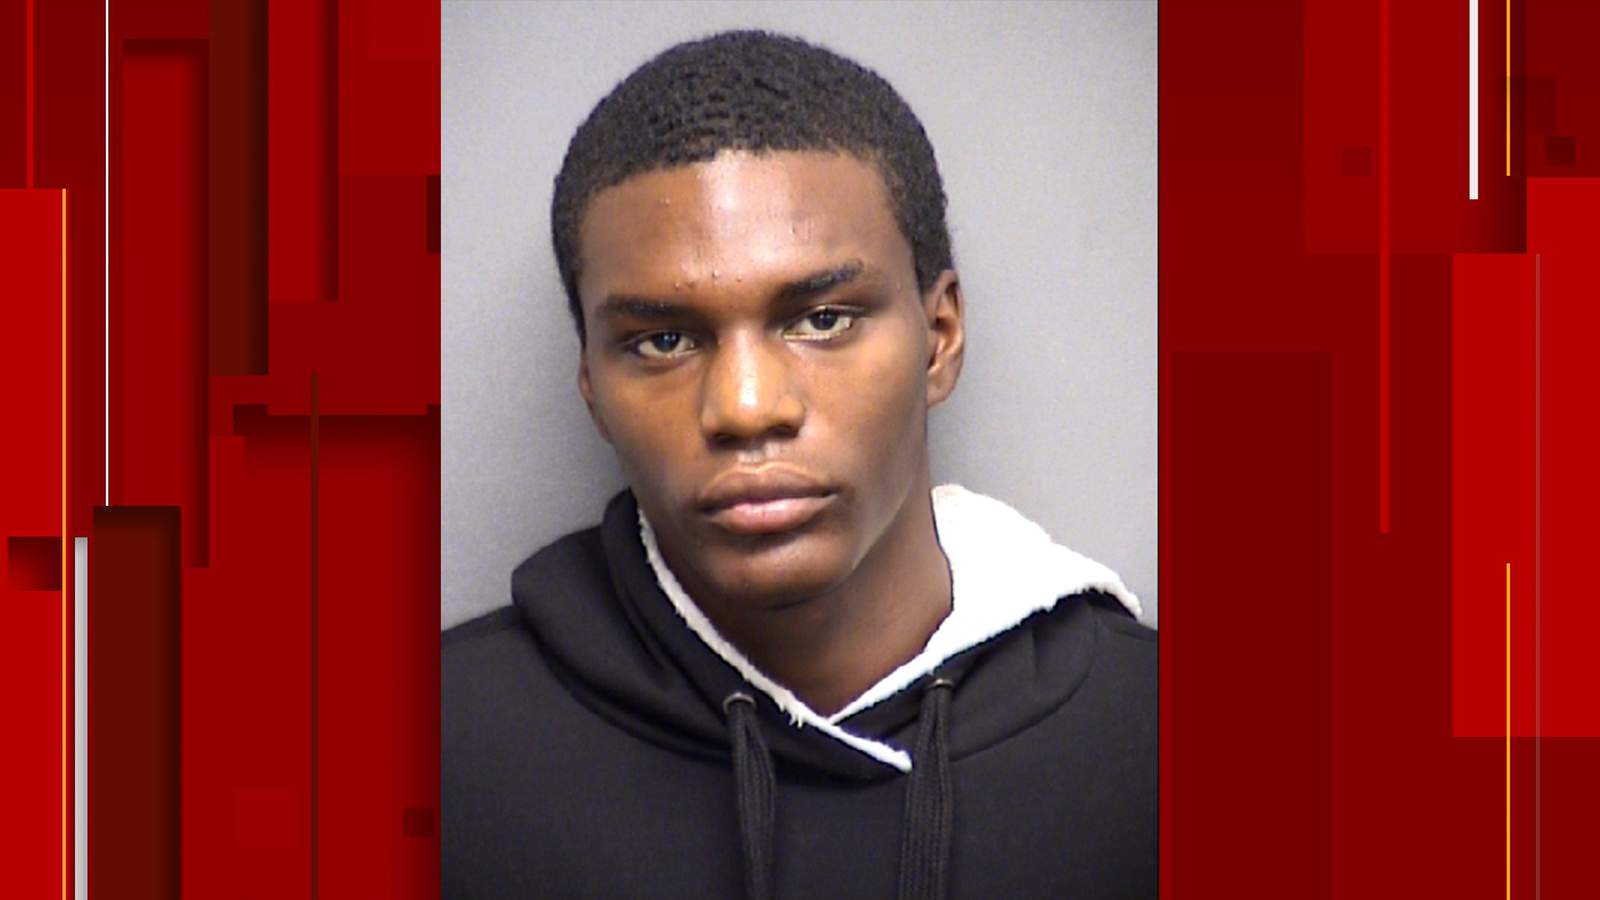 Third man charged in connection with fatal shooting of 19-year-old woman